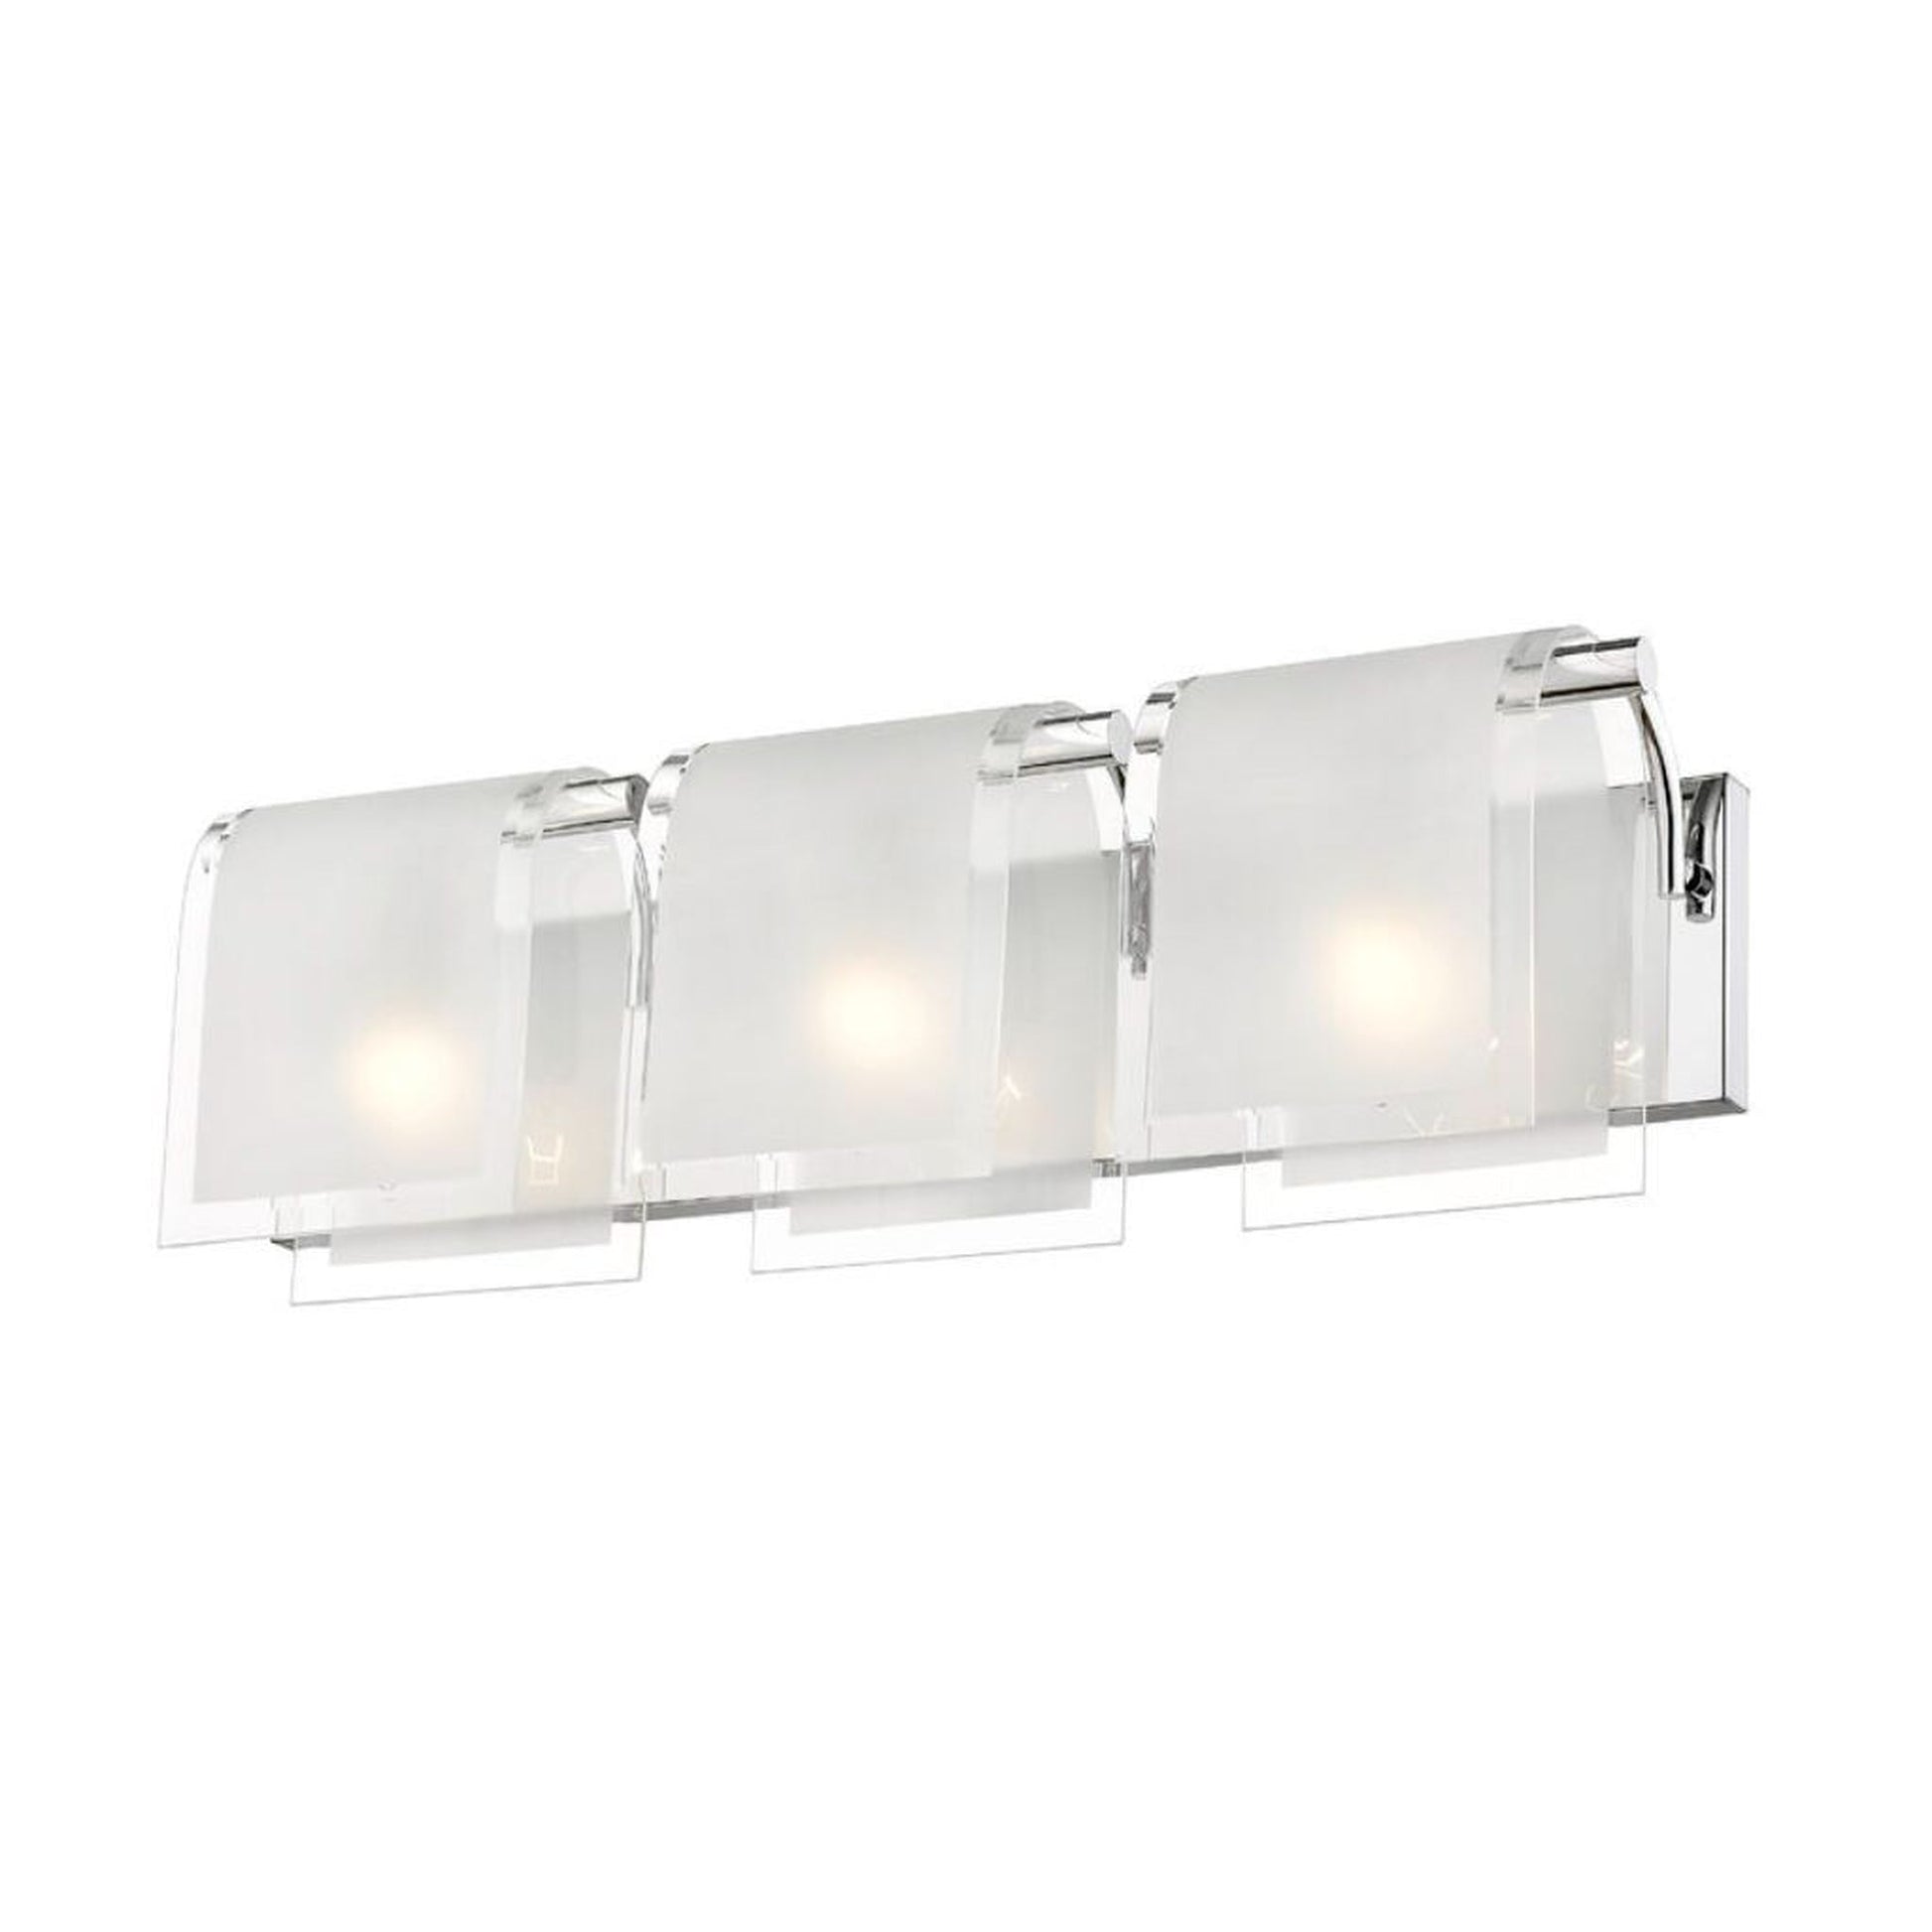 Z-Lite Zephyr 23" 3-Light Chrome Vanity Light With Clear Beveled and Frosted Glass Shade